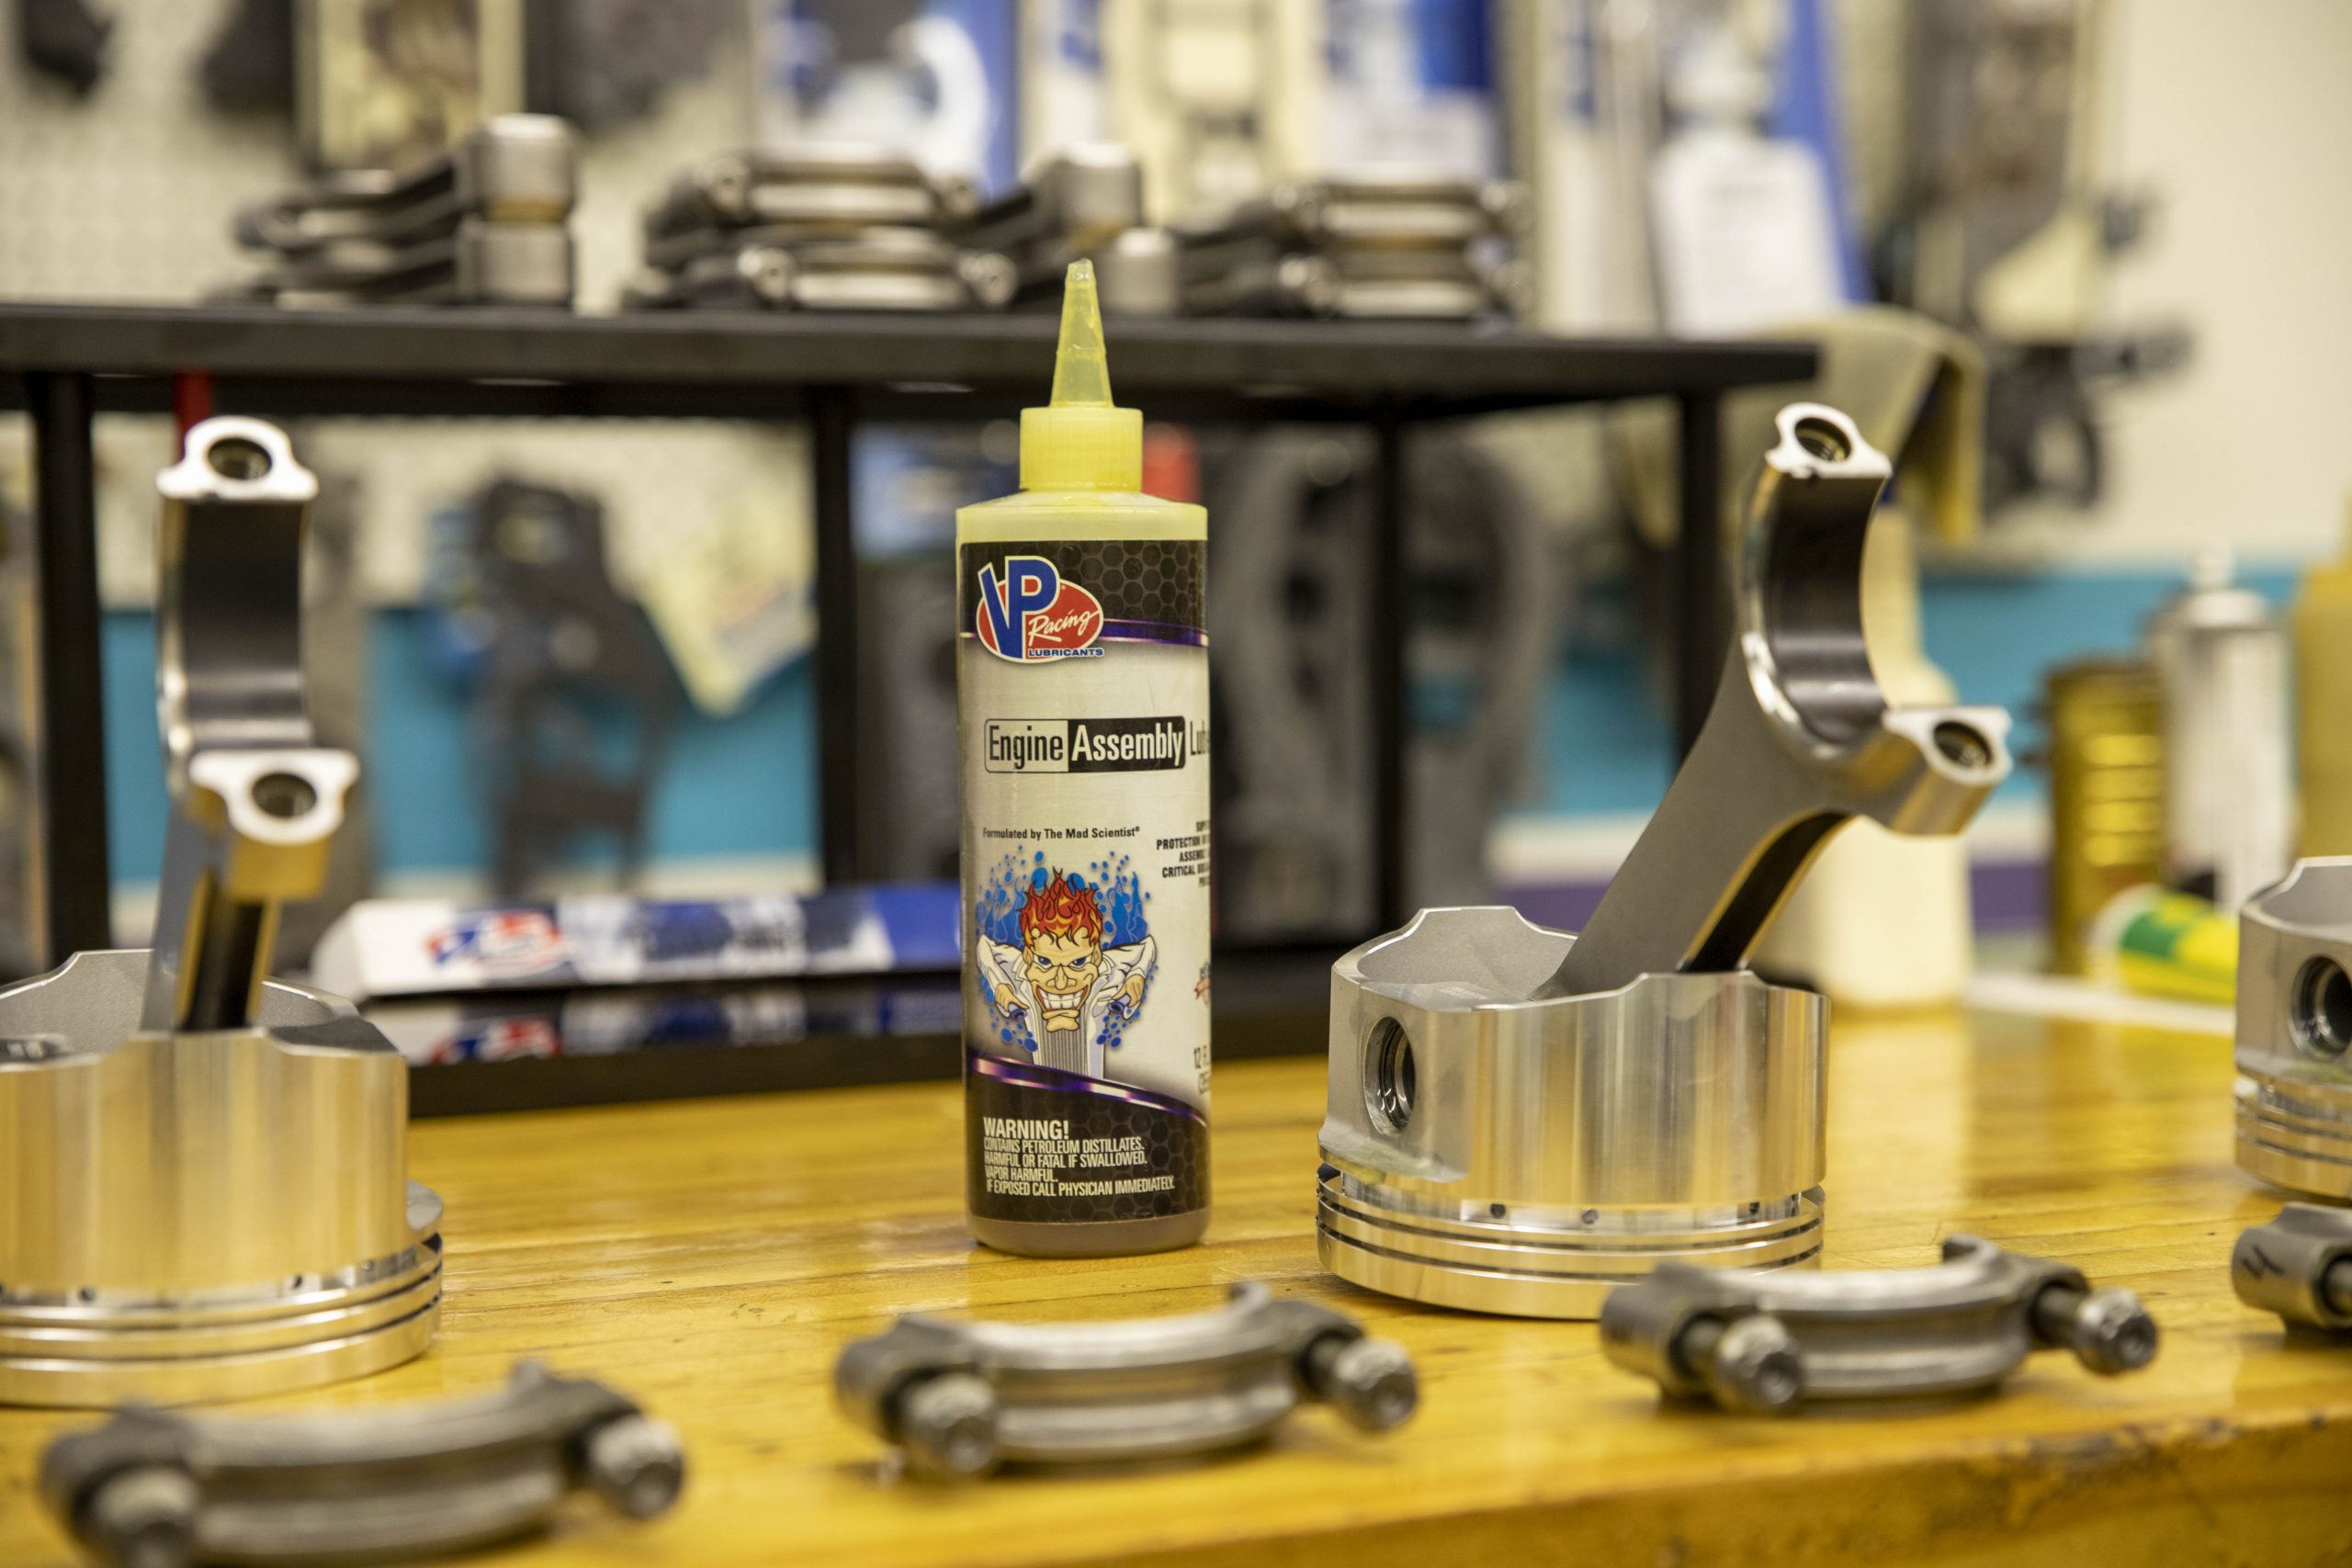 Making Power from Lubricants | THE SHOP